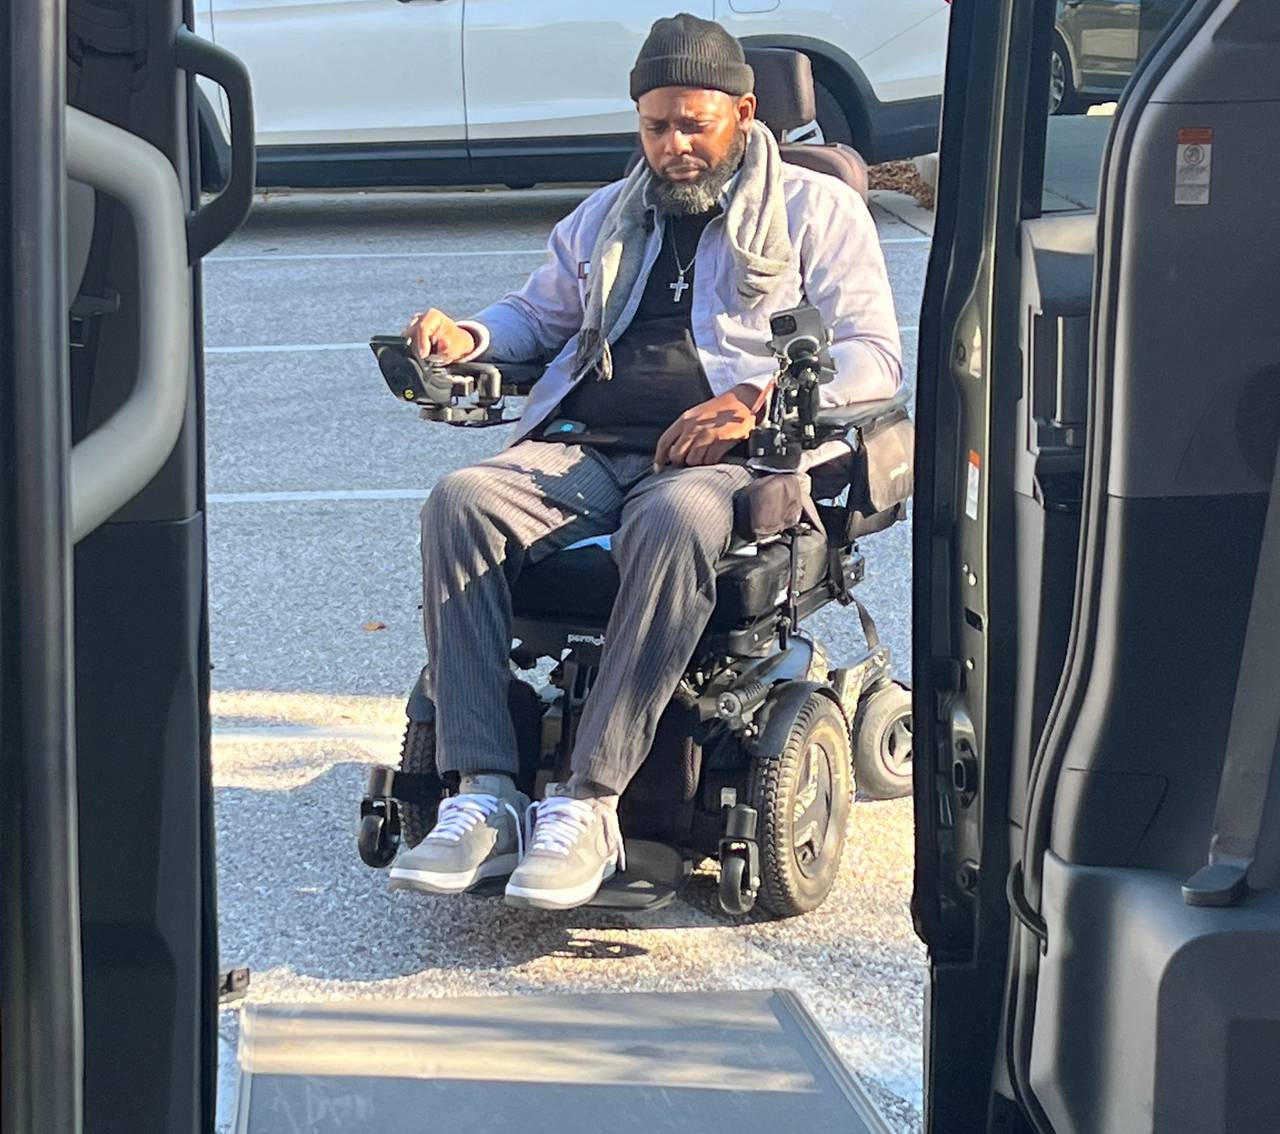 With the push of a button, the door to Baltimore Police Sgt. Isaac “Ike” Carrington’s van opens up, and a ramp deploys onto the asphalt. He guides his wheelchair up and inside, positioning himself where the driver’s seat would normally be.